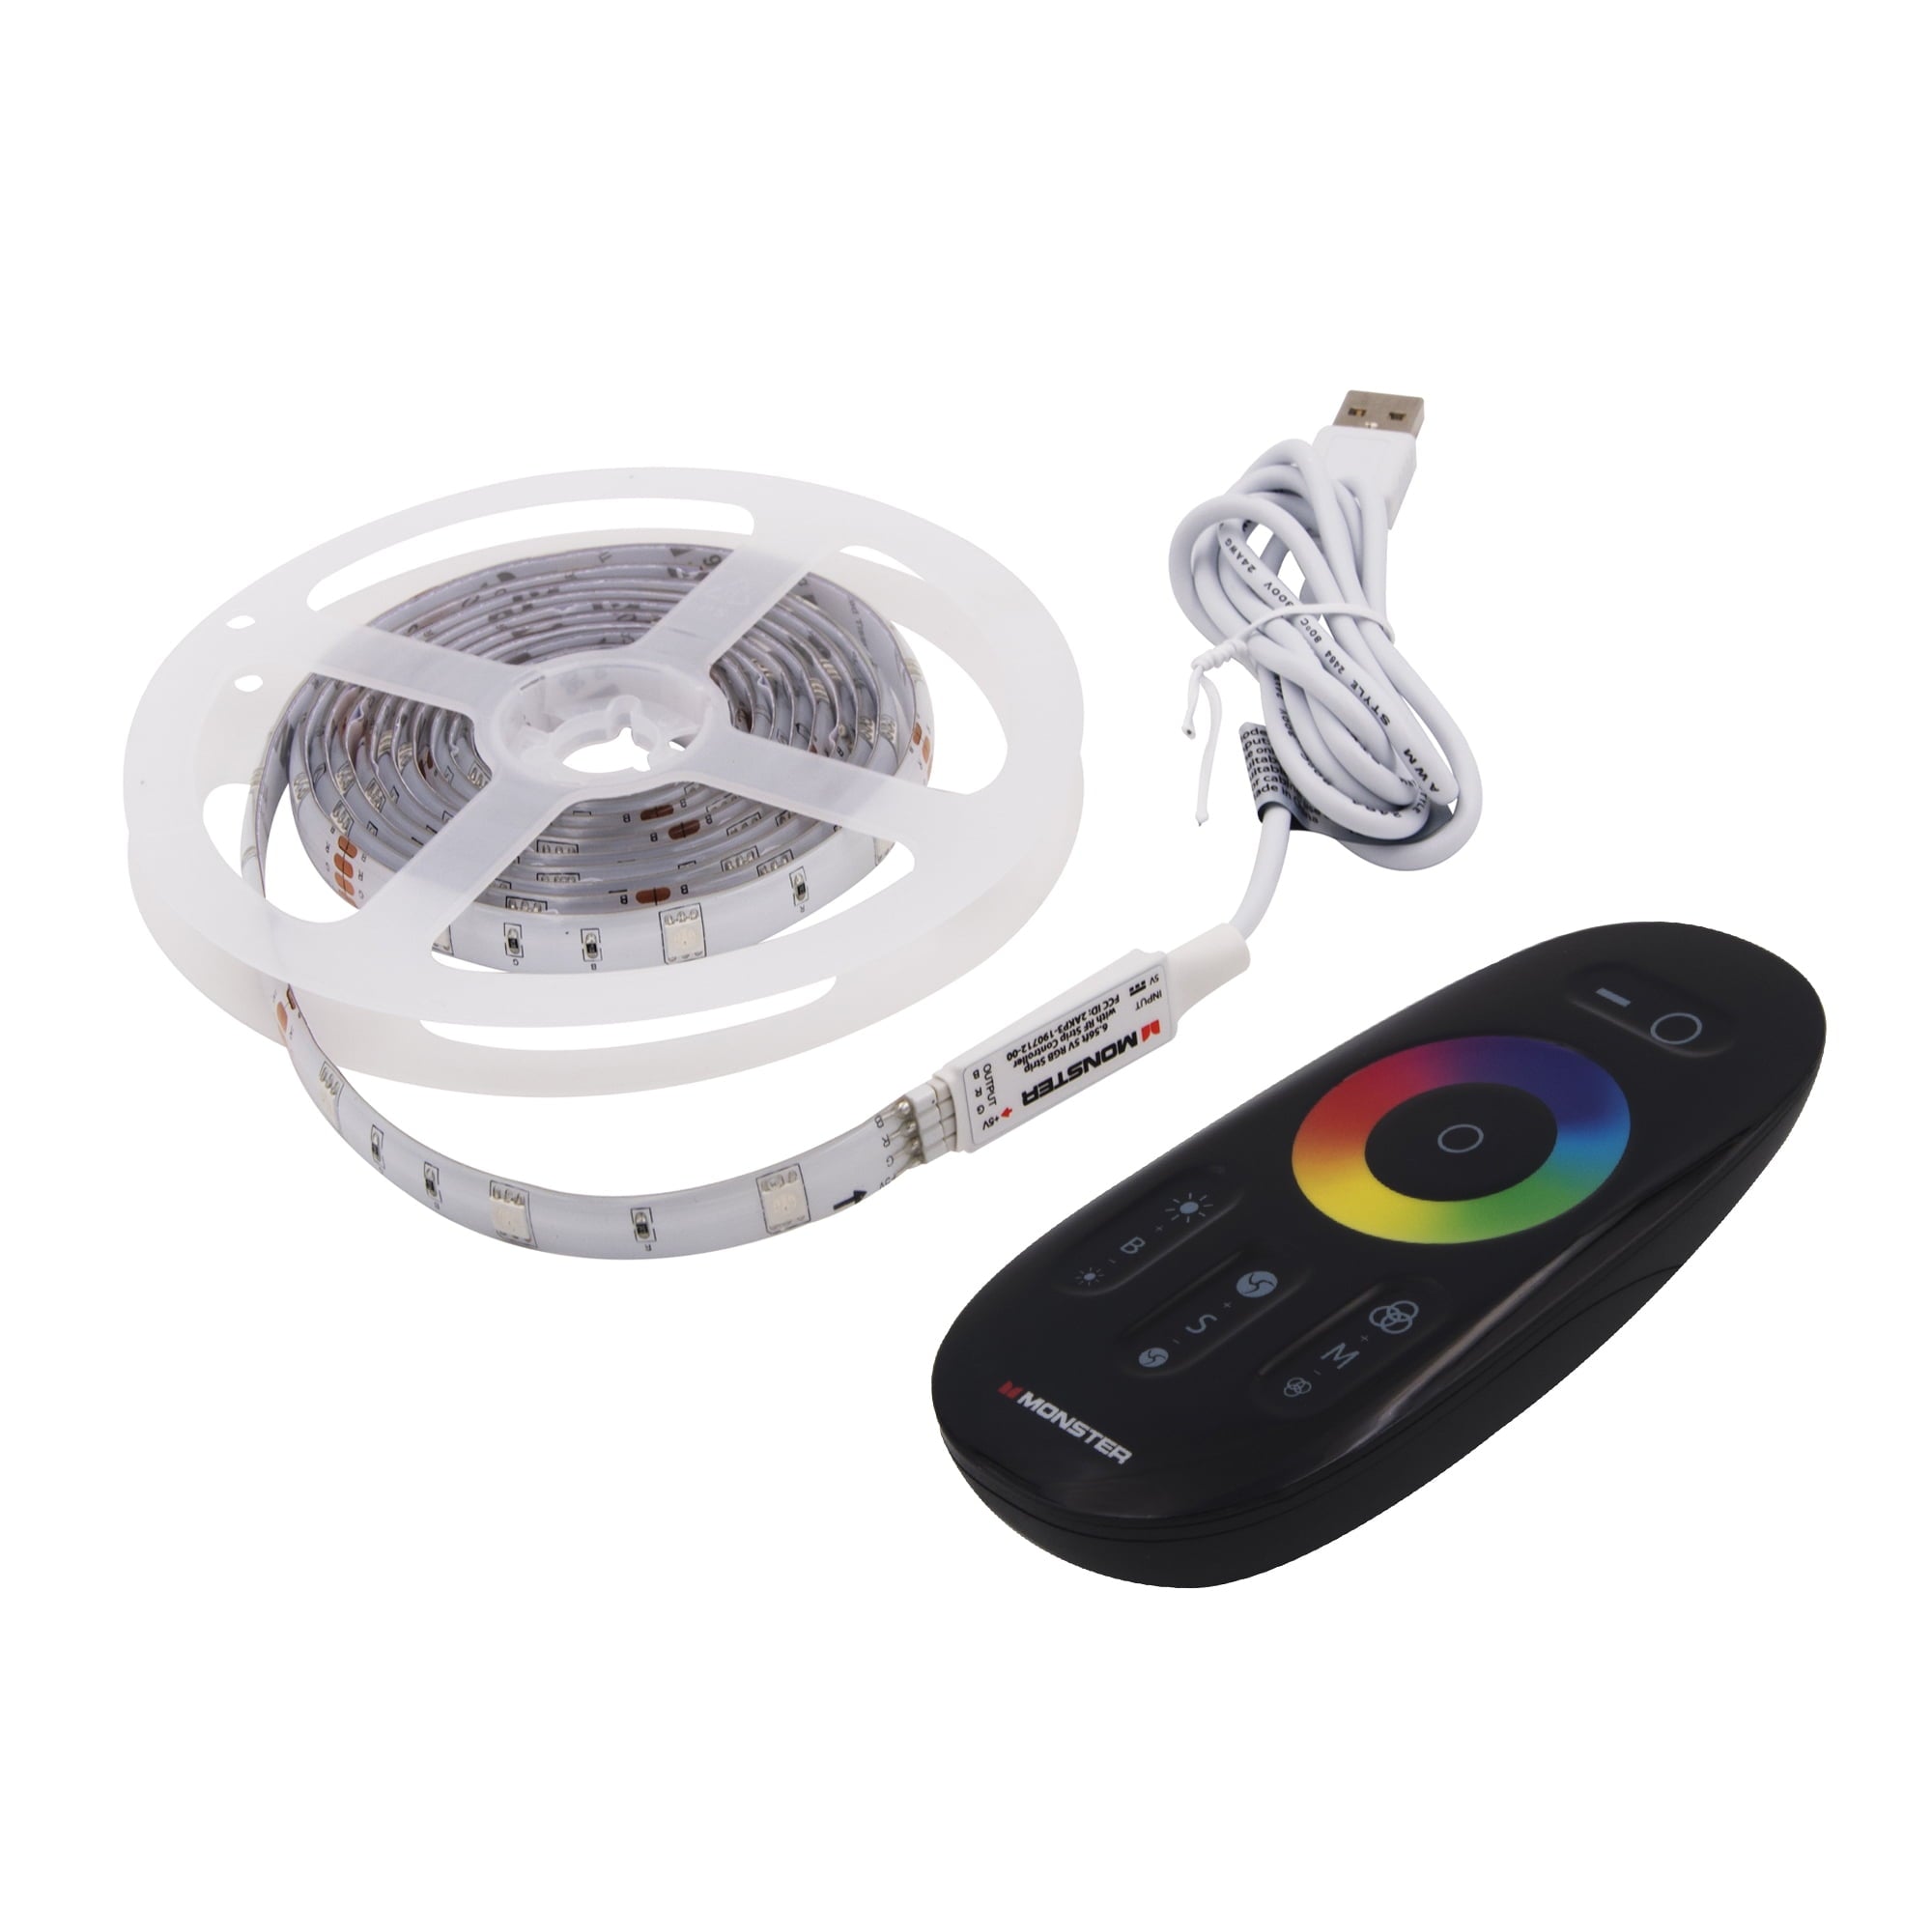 Monster Illuminessence 5V DC 7W Holiday Lighting Small LED Strip /LED  lighting with amazing multi-color